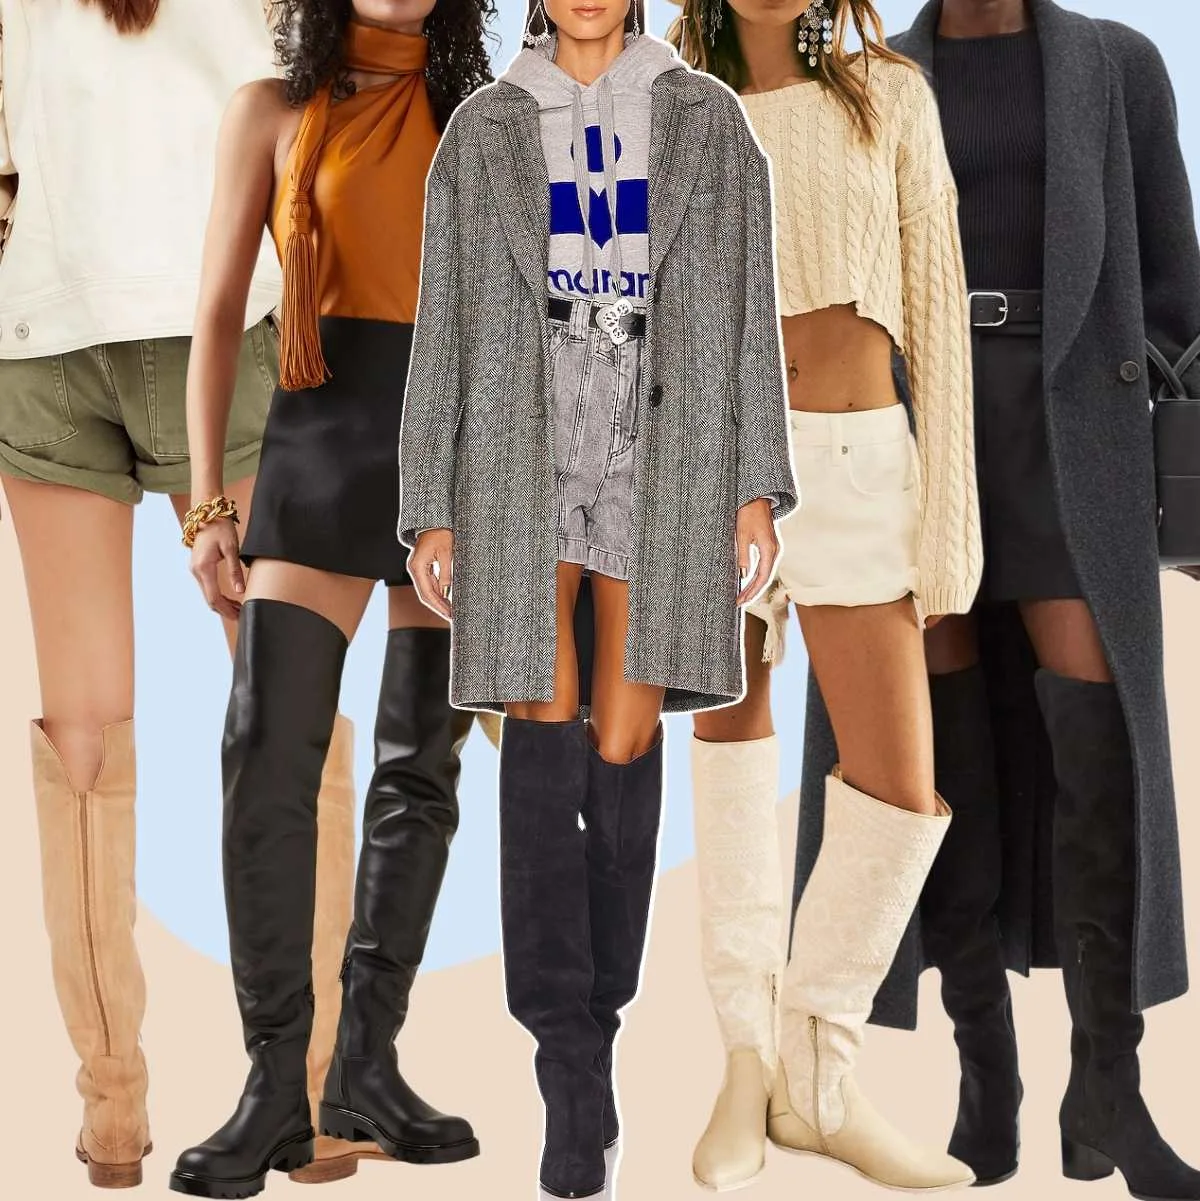 Collage of 5 women wearing thigh high boots outfits with shorts.